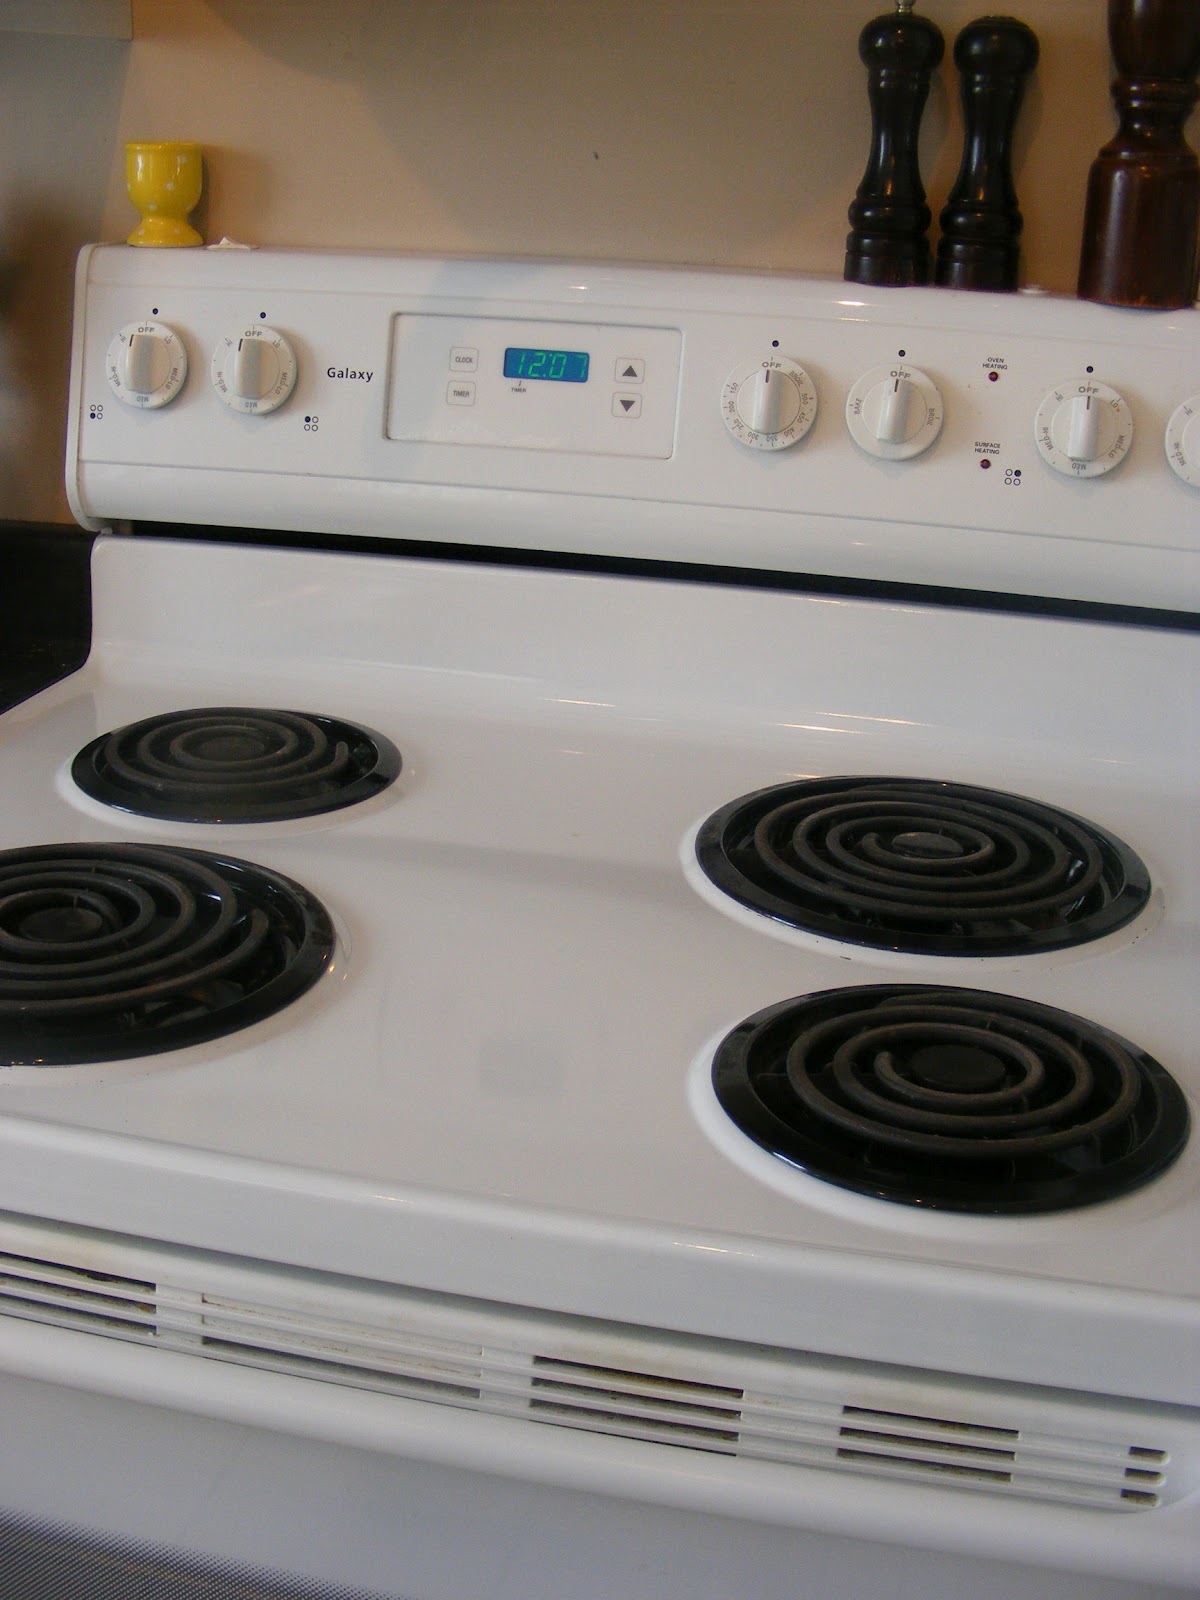 What makes a stove truly cost-effective?